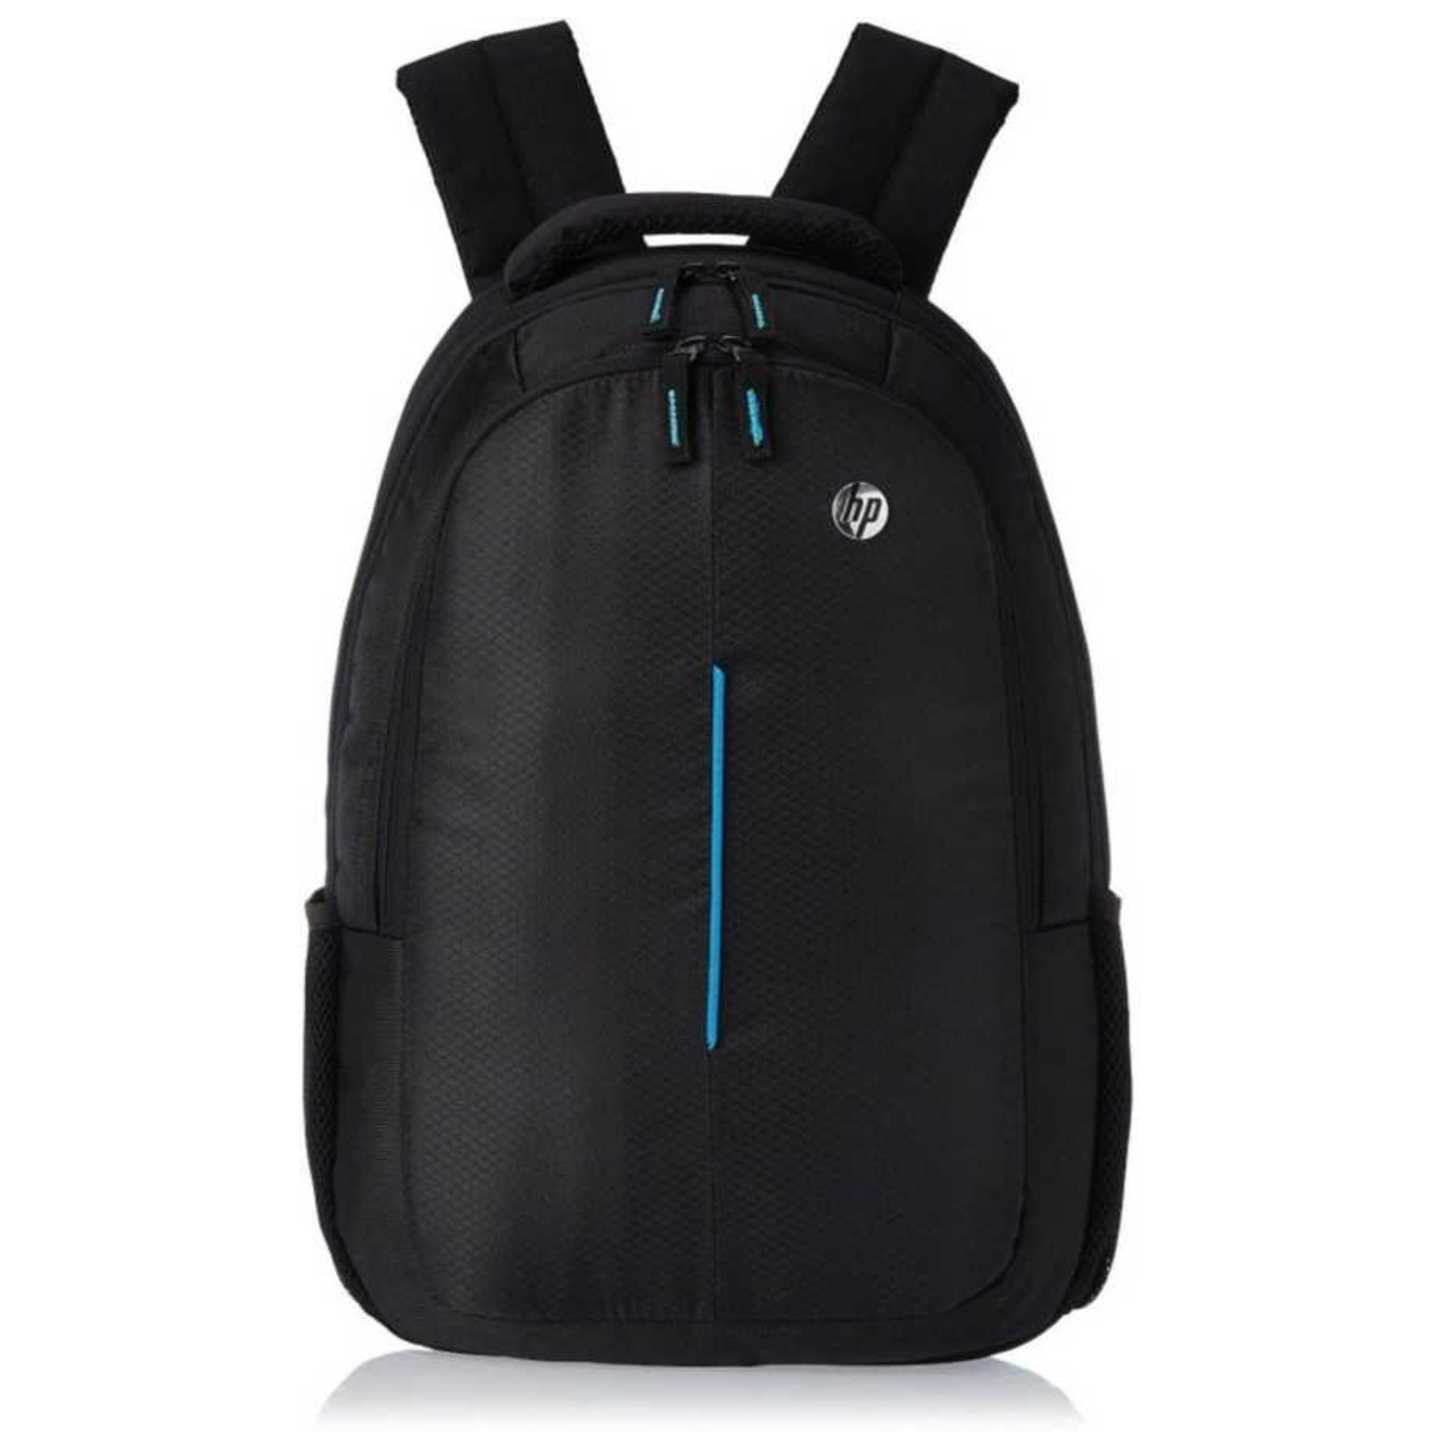 HP 2 Compartment Laptop Backpack